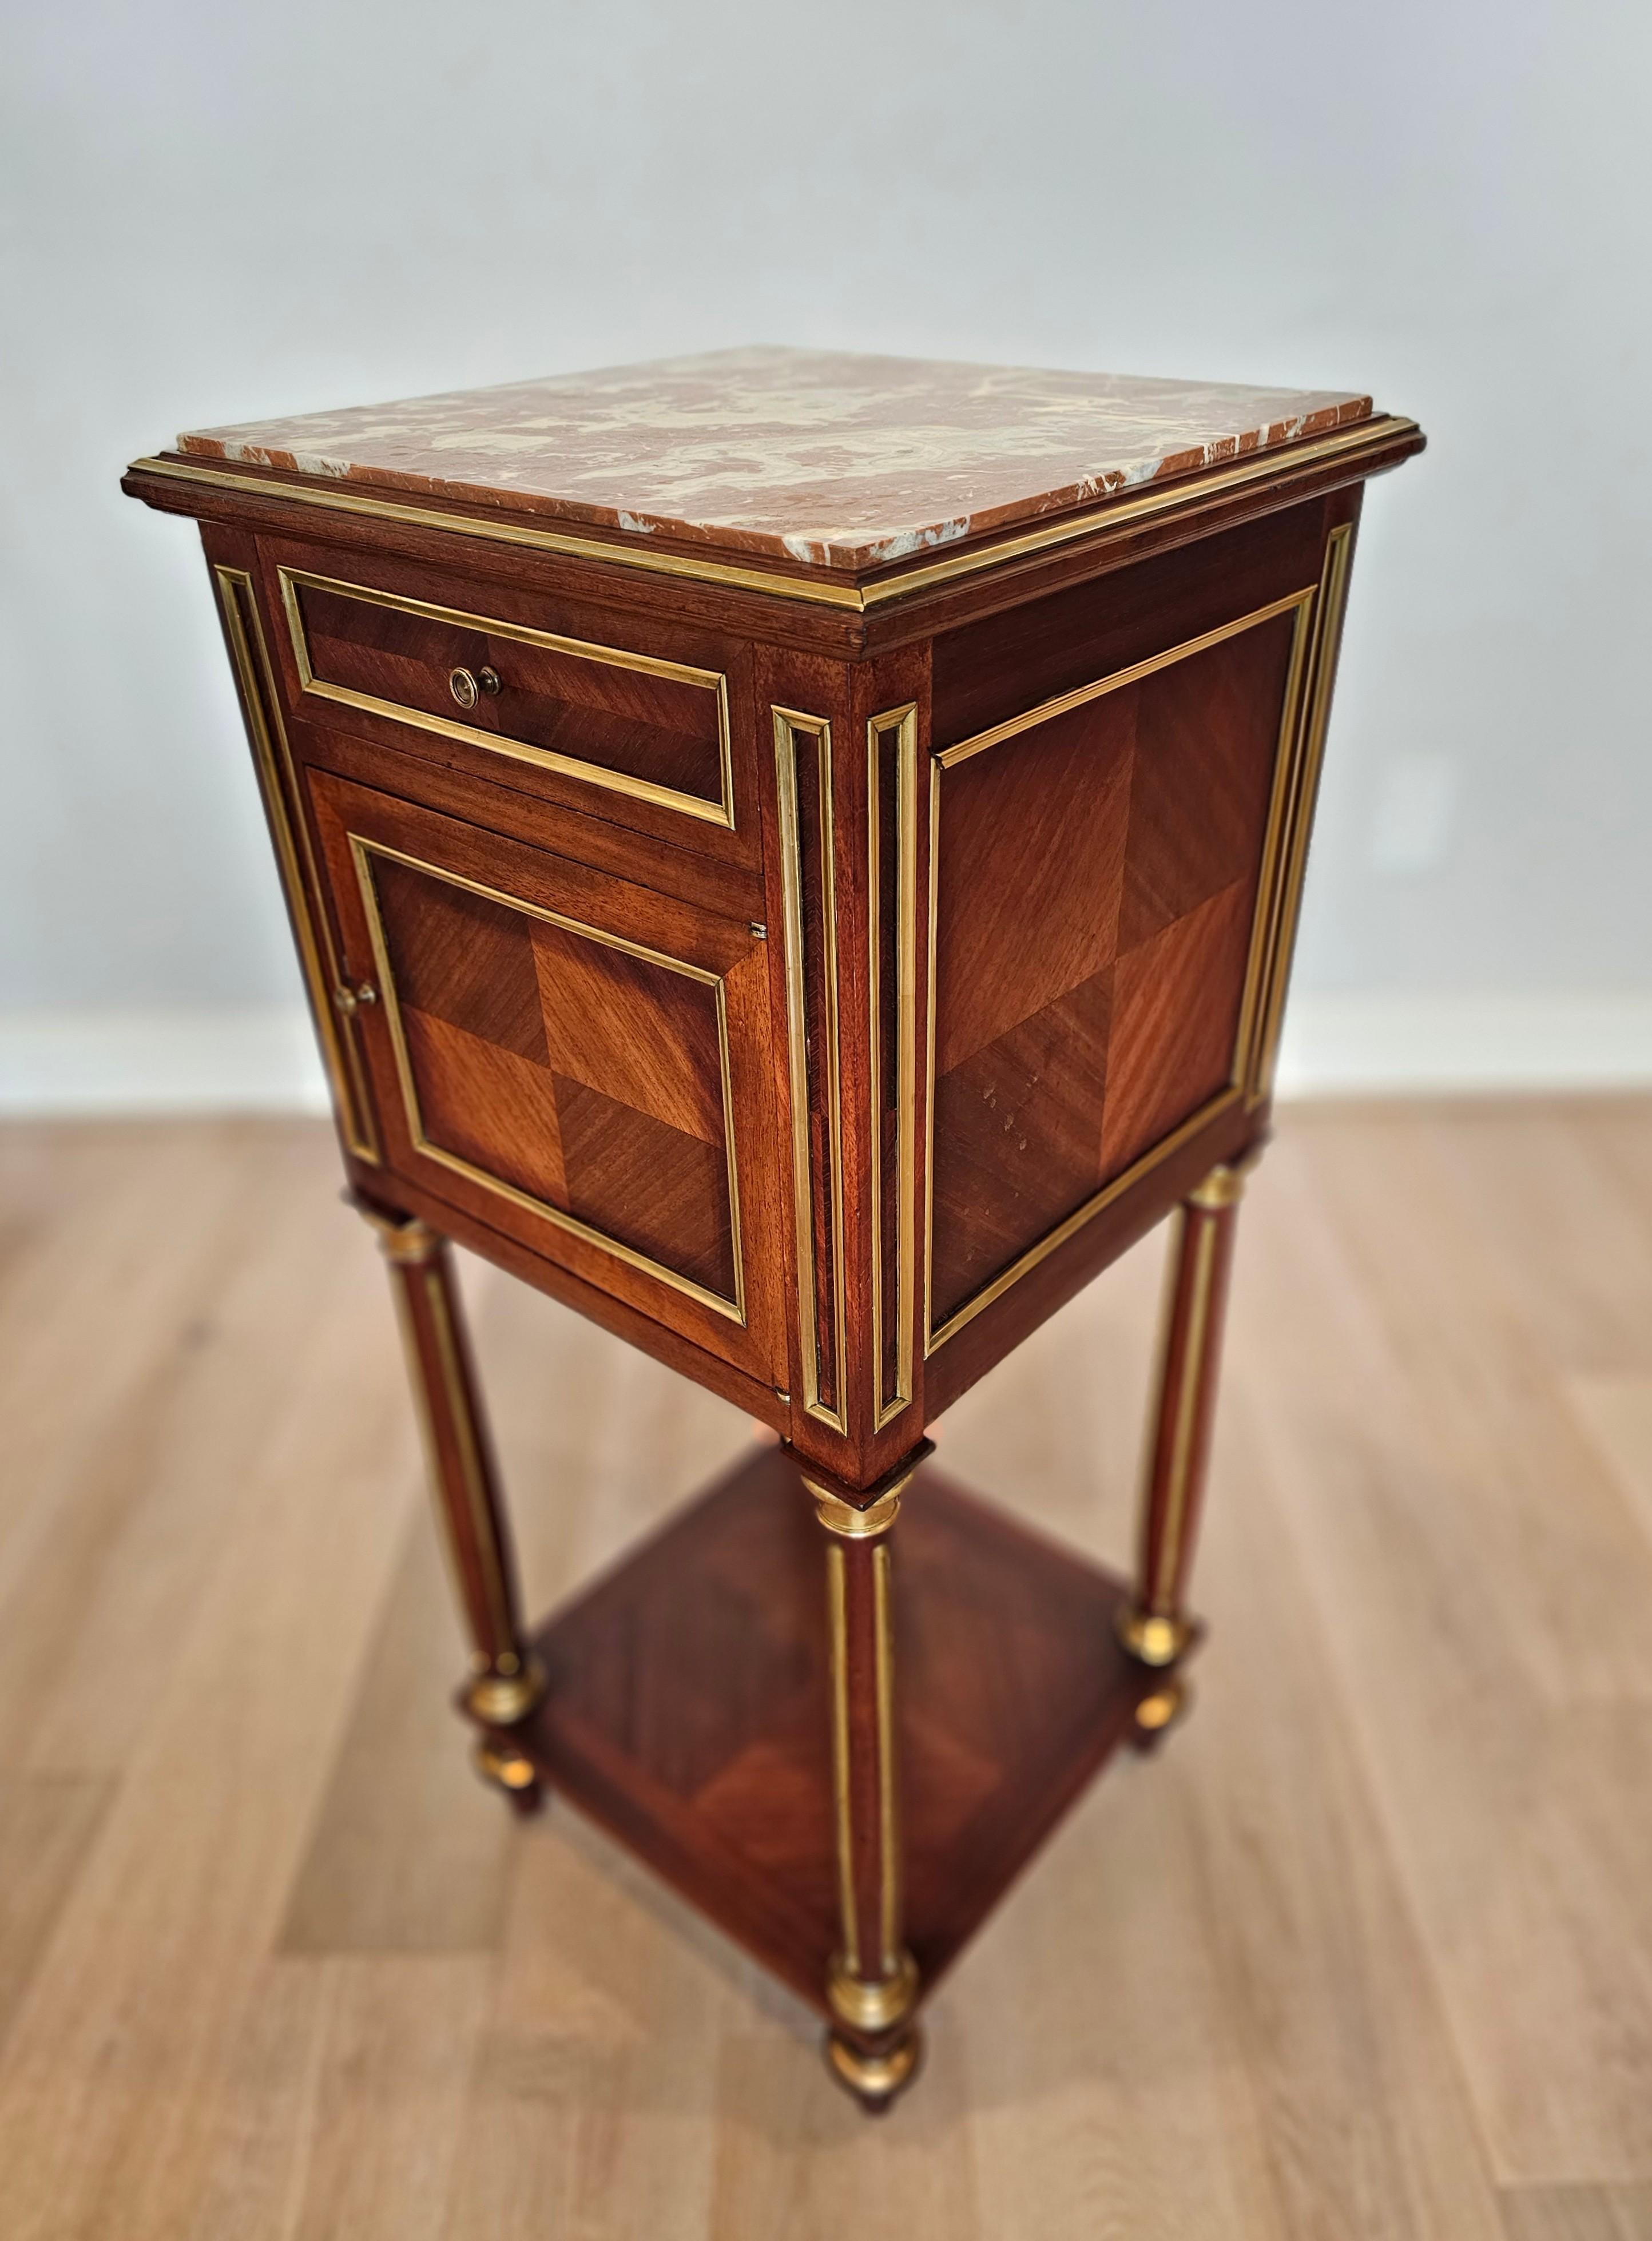 Fine Antique French Louis XVI Style Mahogany Nightstand Table In Excellent Condition For Sale In Forney, TX